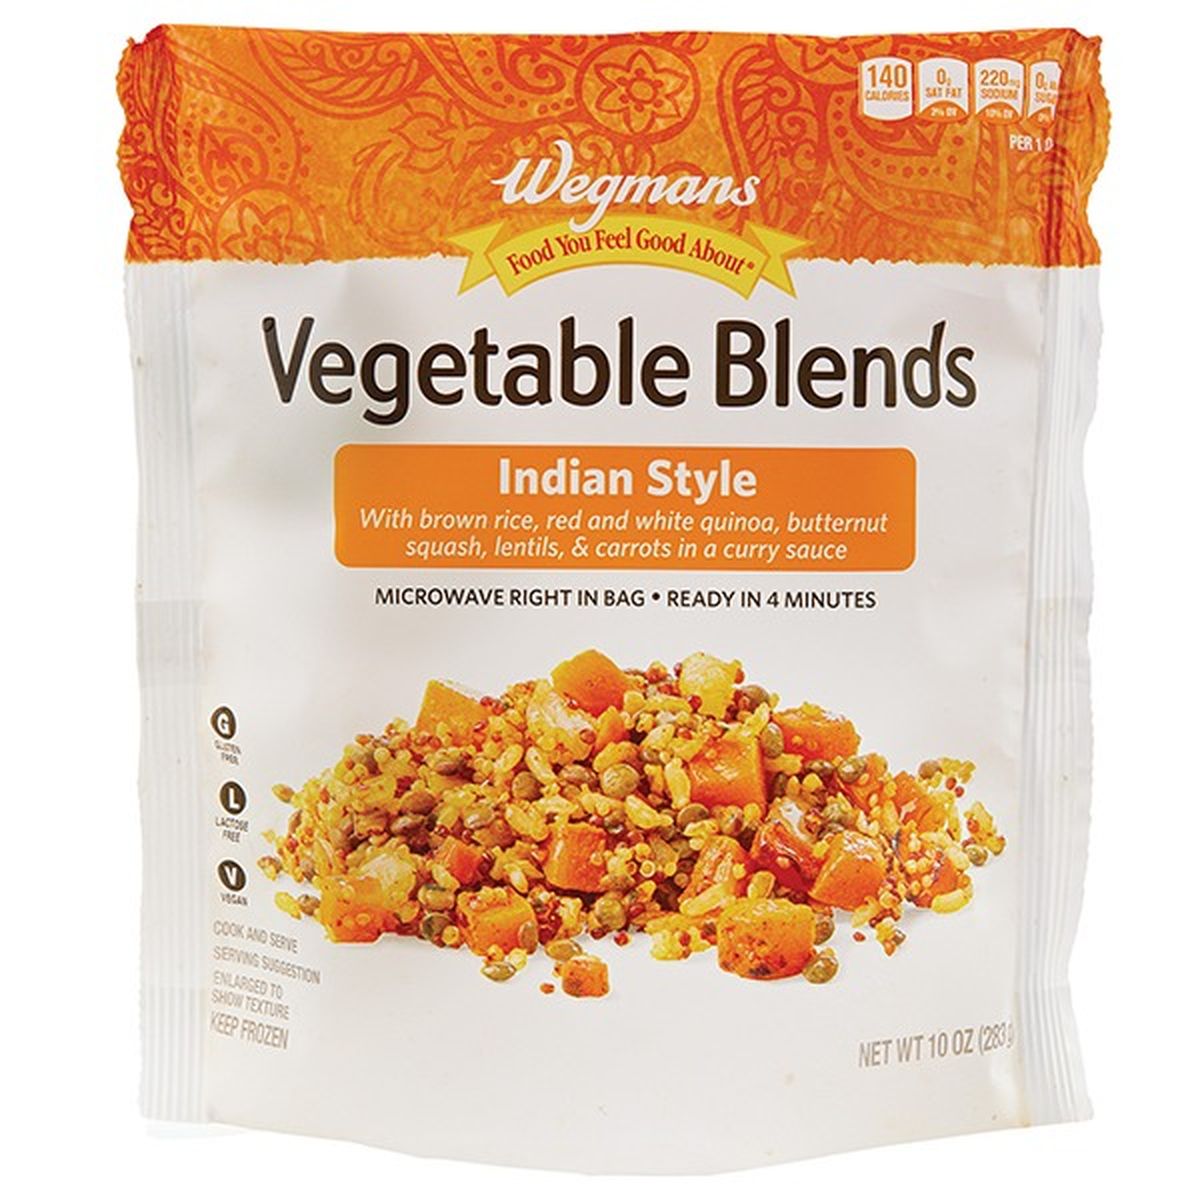 Calories in Wegmans Blends, Vegetable, Indian Style